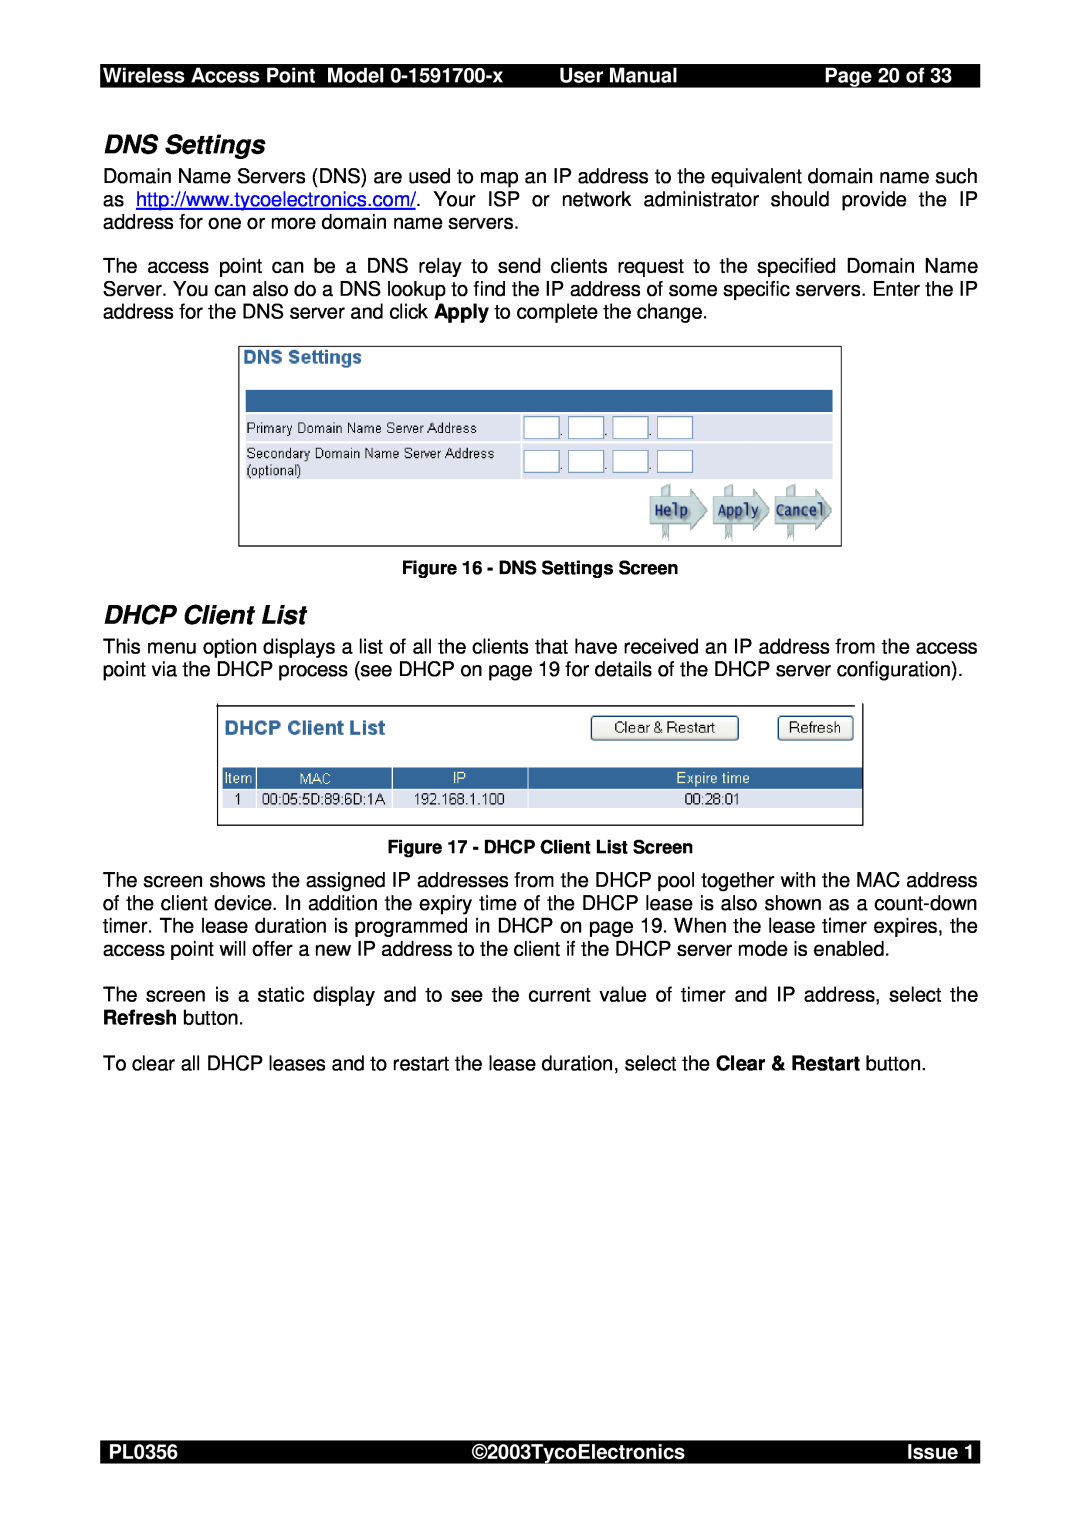 Tyco 0-1591700-x DNS Settings, DHCP Client List, Page 20 of, Wireless Access Point Model, User Manual, PL0356, Issue 